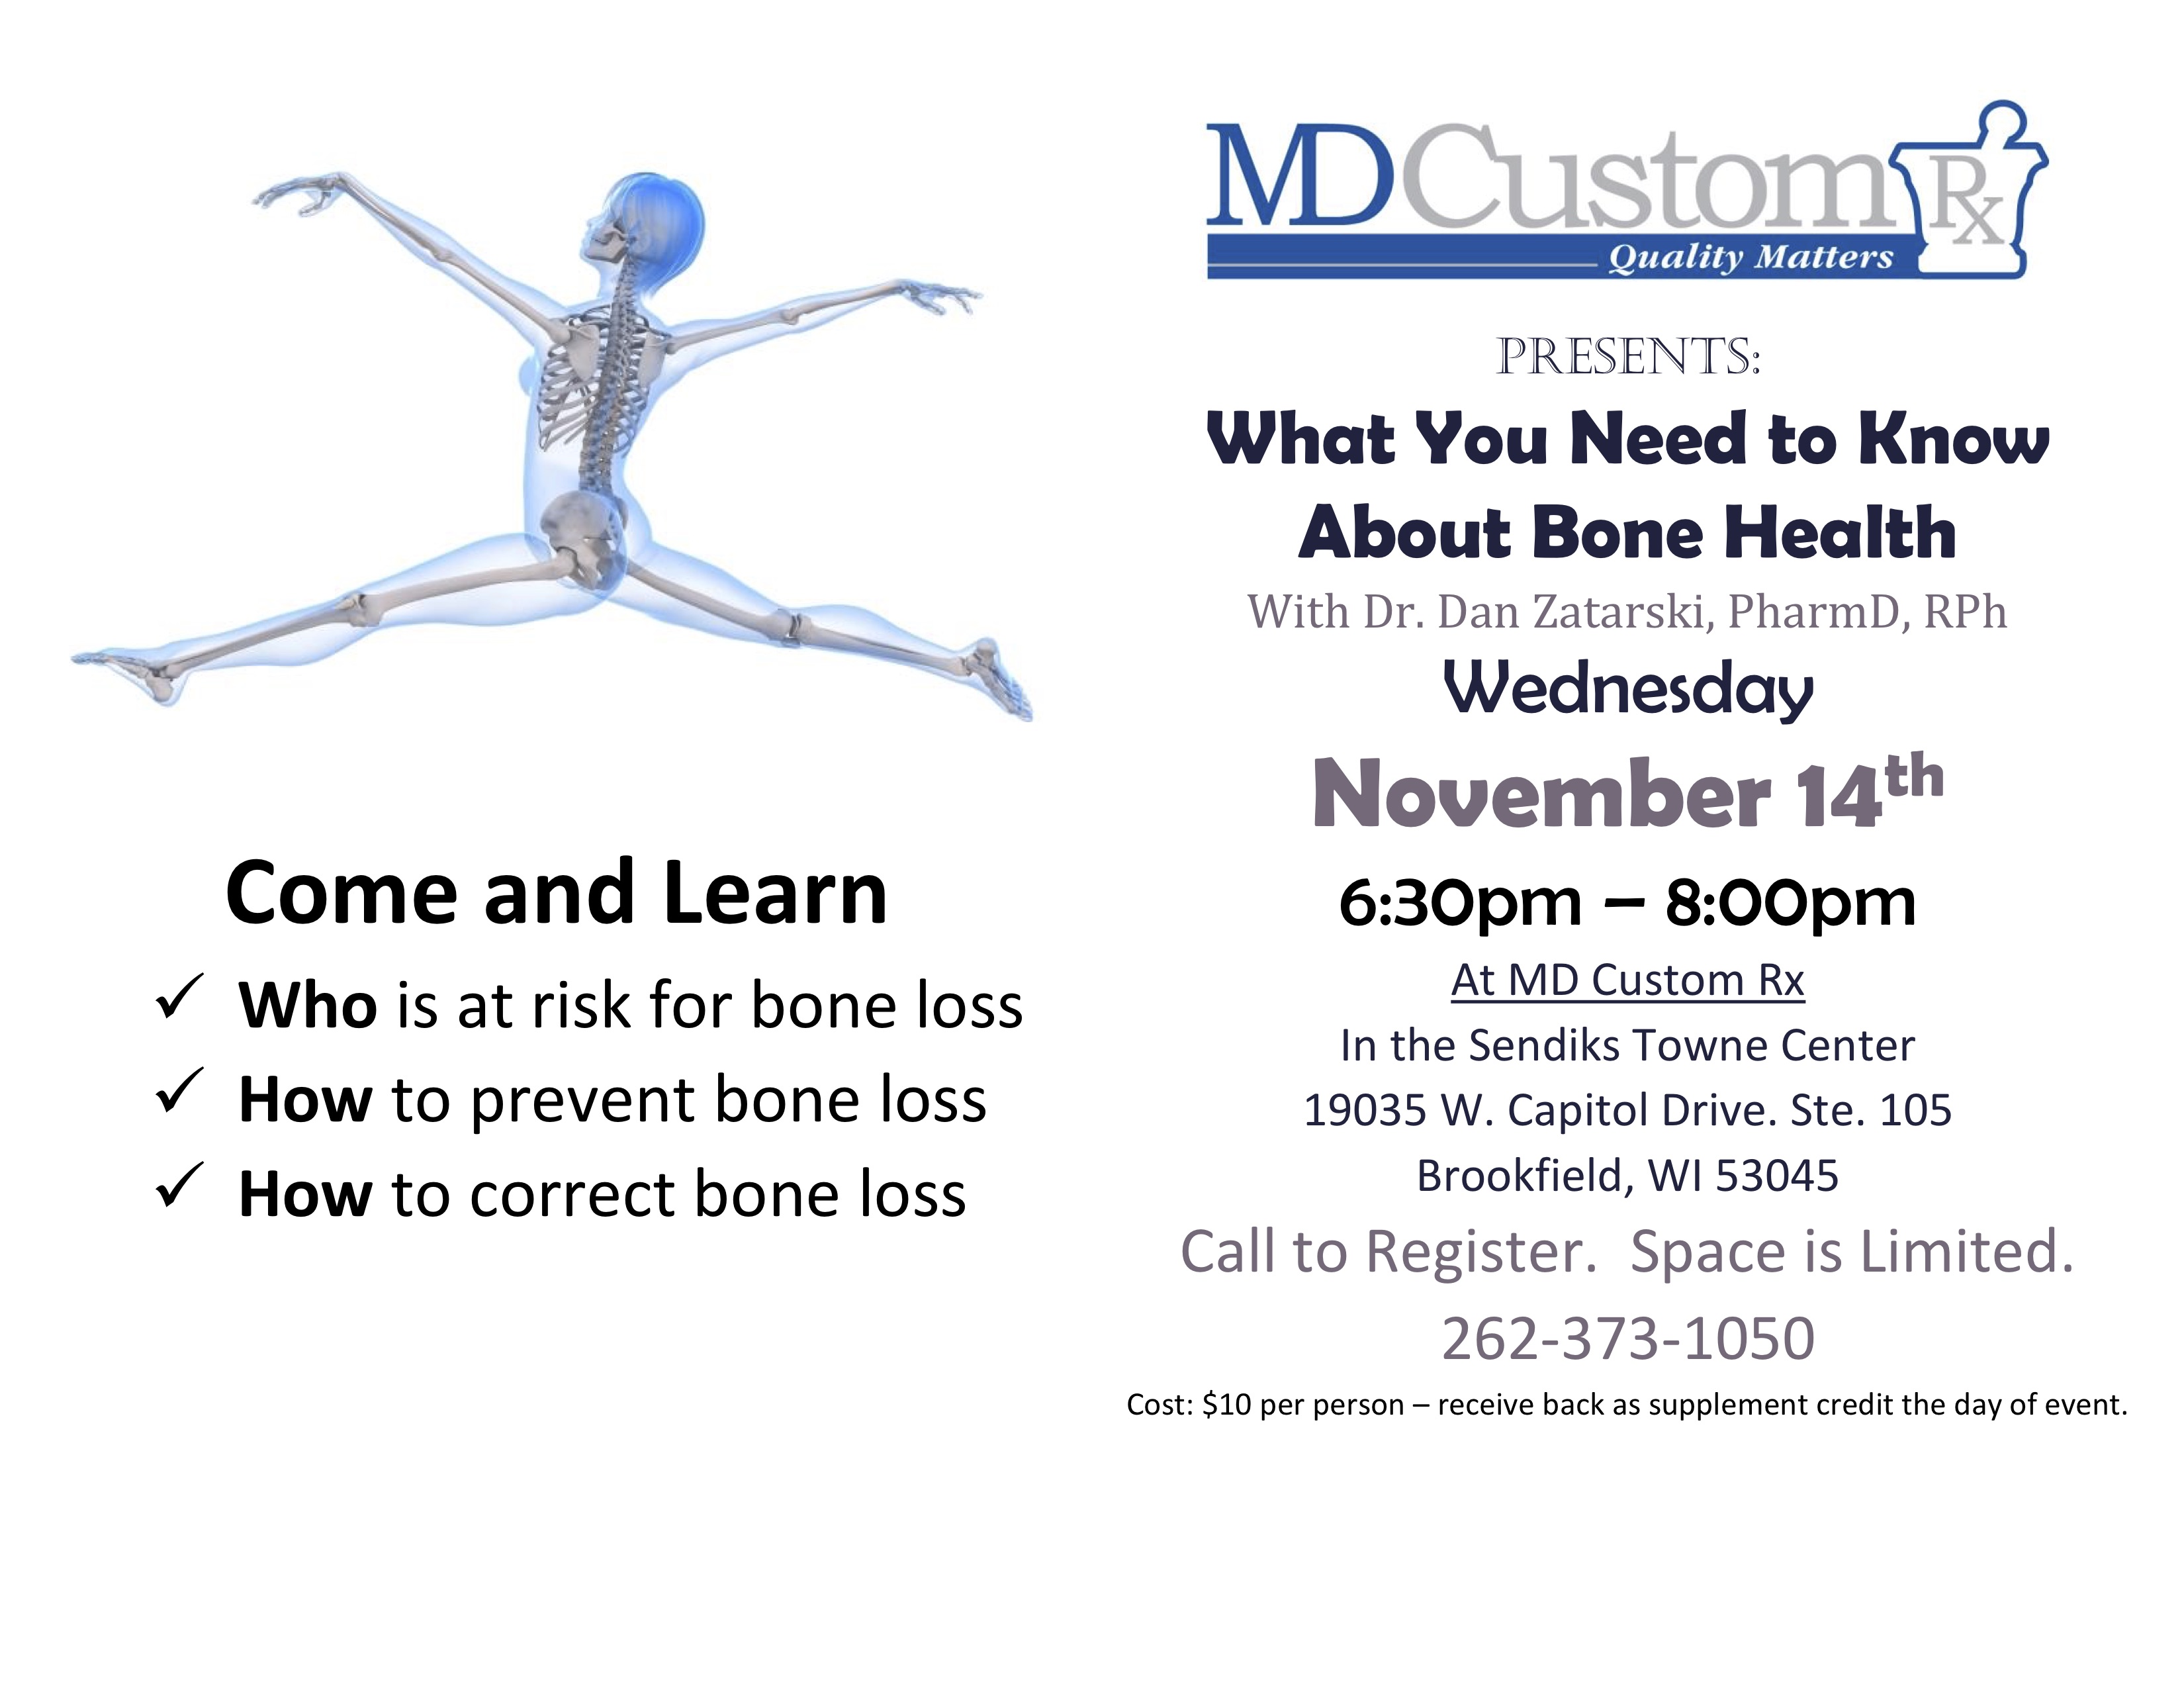 What You Need to Know About Bone Health